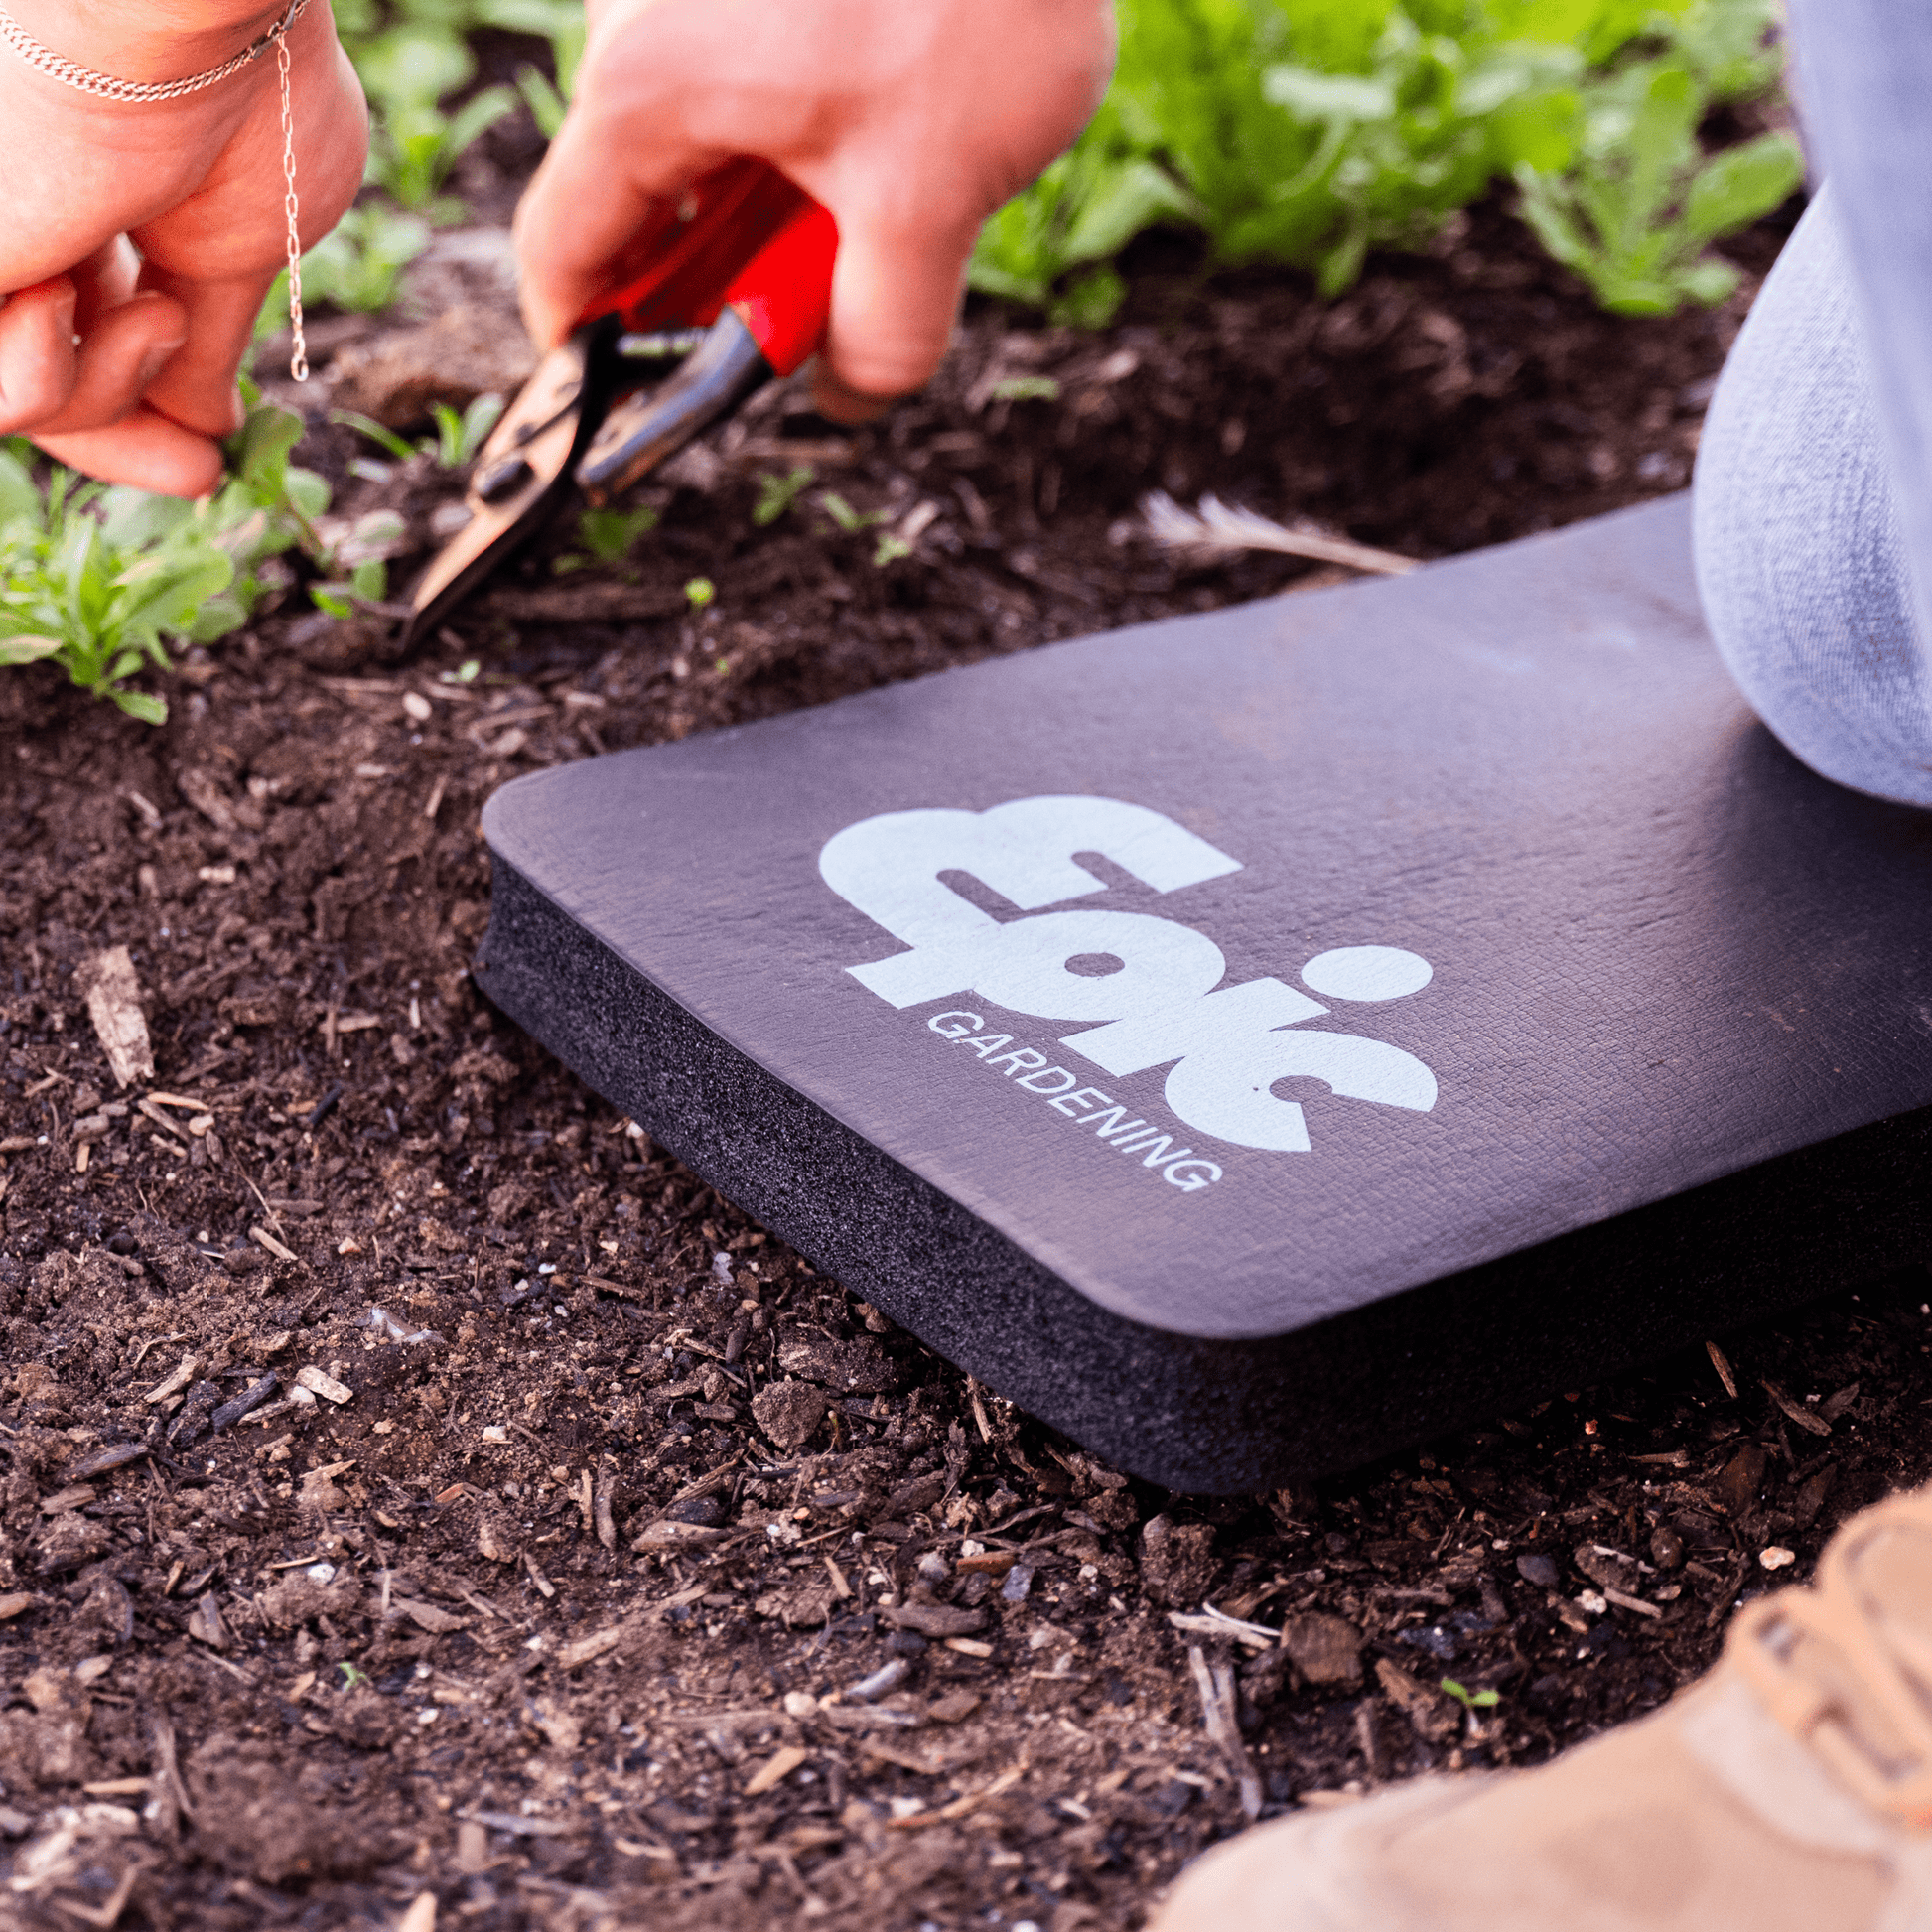 Gardener kneeling on a black kneepad for gardening, holding pruning shears. The brand name Epic Gardening appears on the pad.